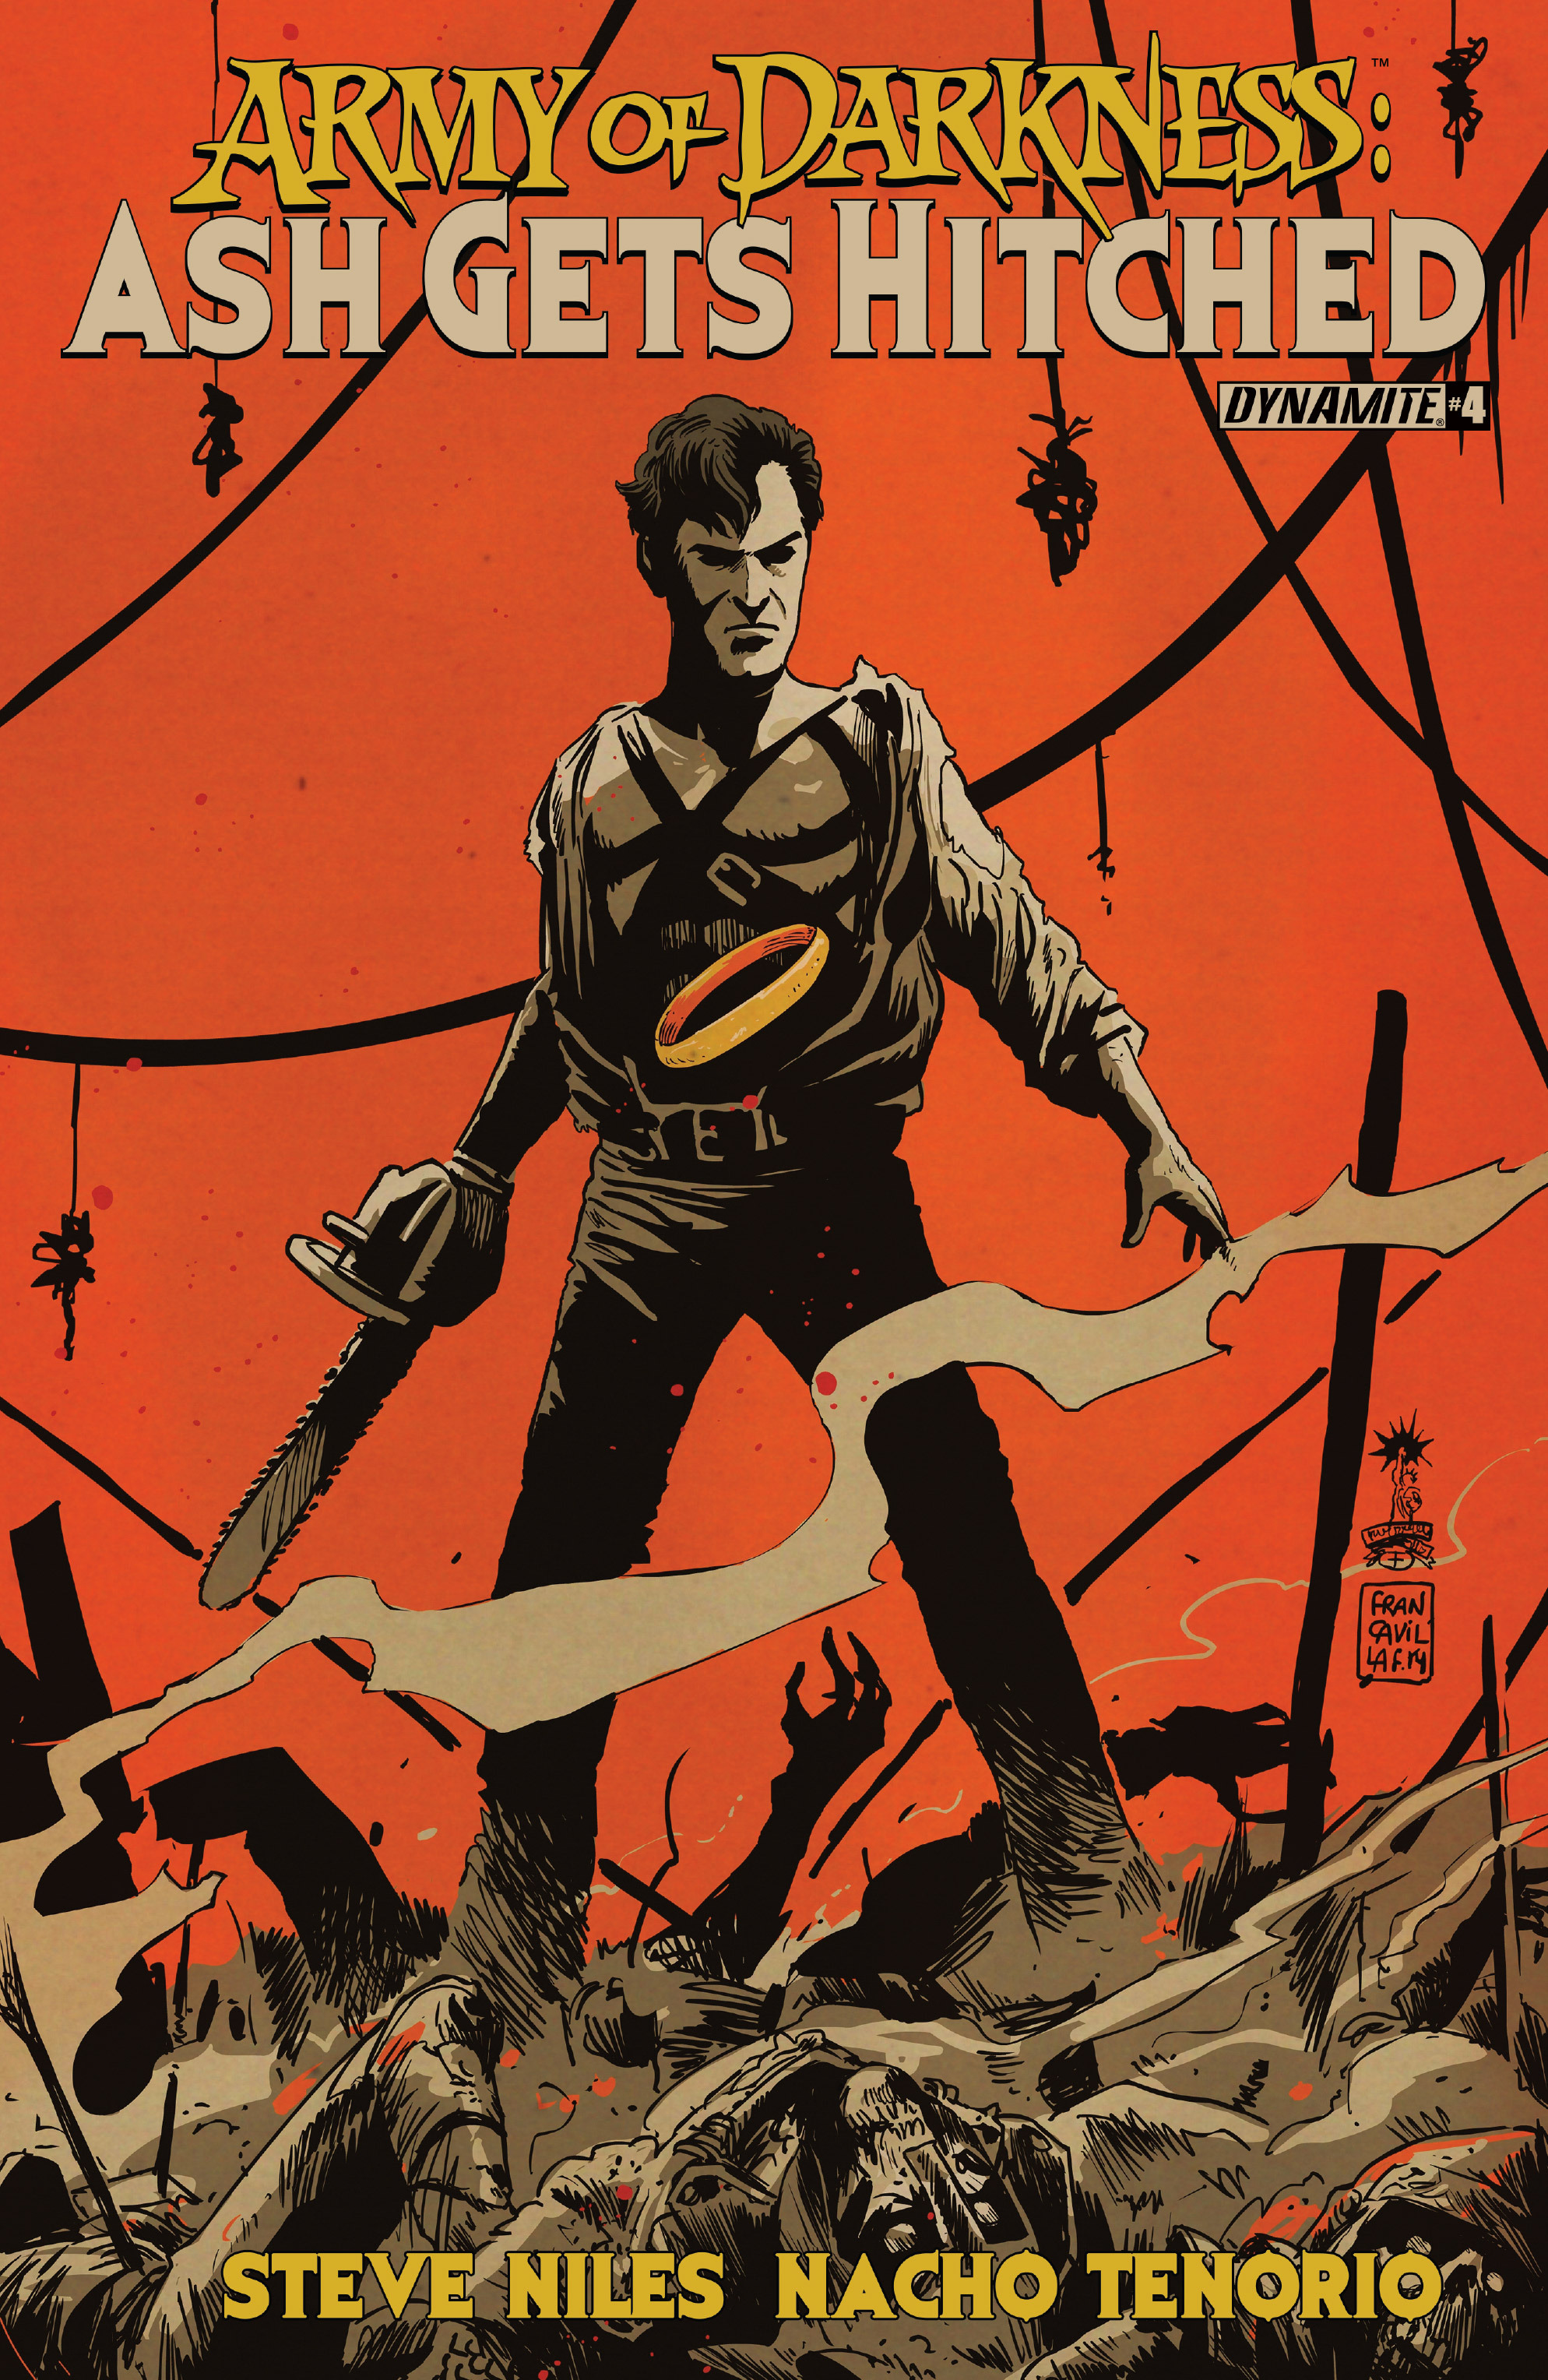 Read online Army of Darkness: Ash Gets Hitched comic -  Issue #4 - 2